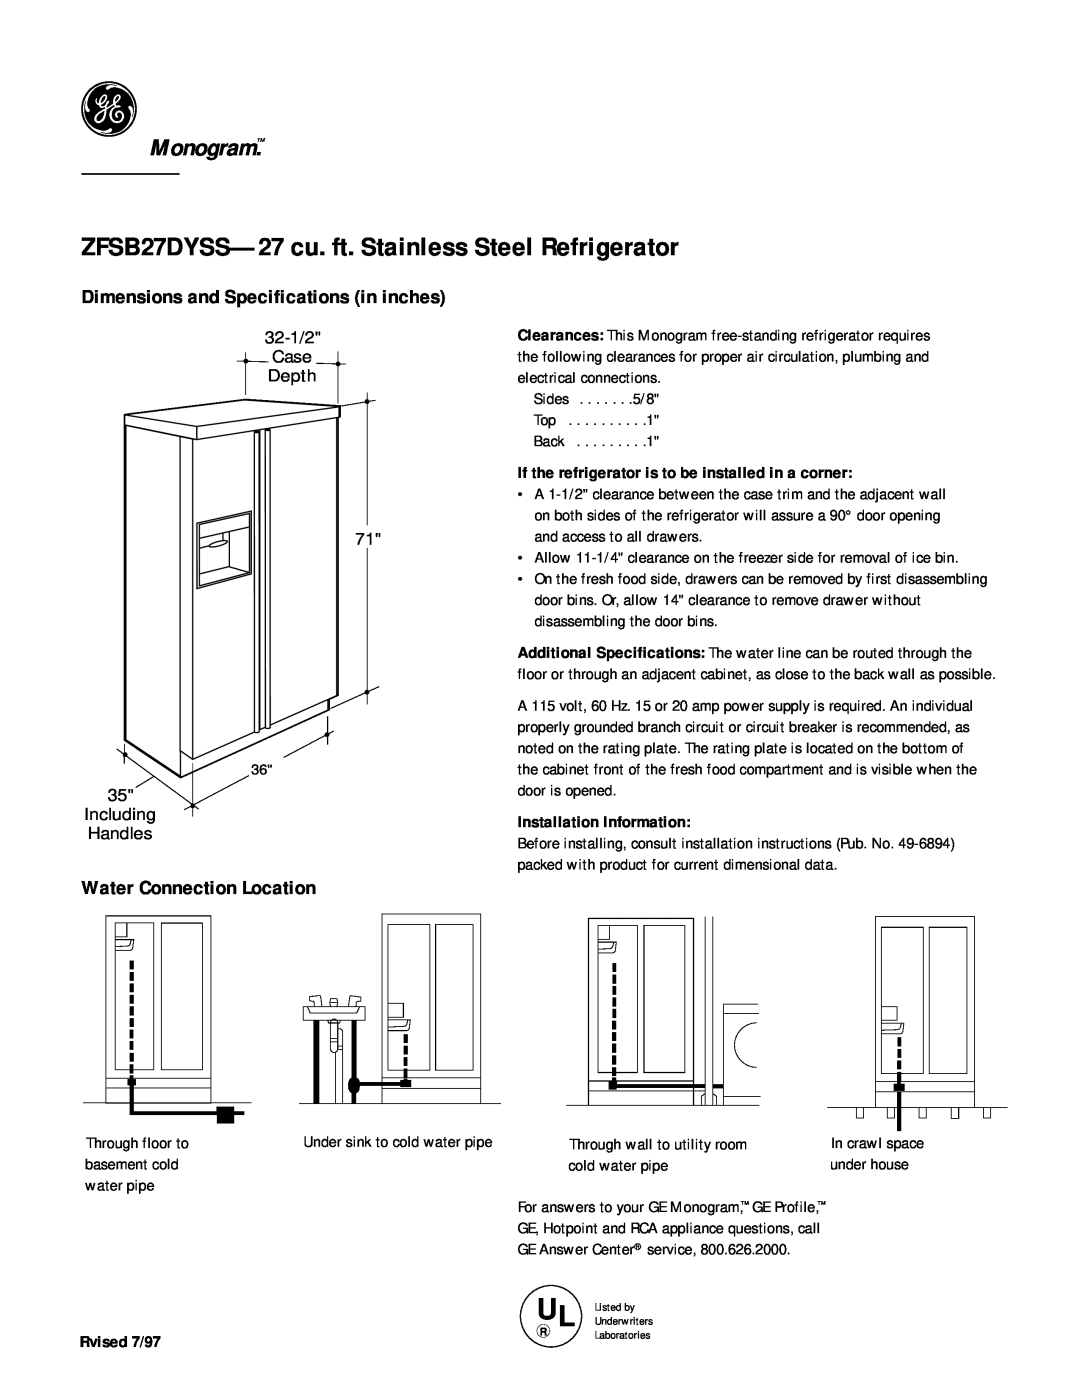 GE Monogram dimensions ZFSB27DYSS-27 cu. ft. Stainless Steel Refrigerator, Monogram, Water Connection Location 